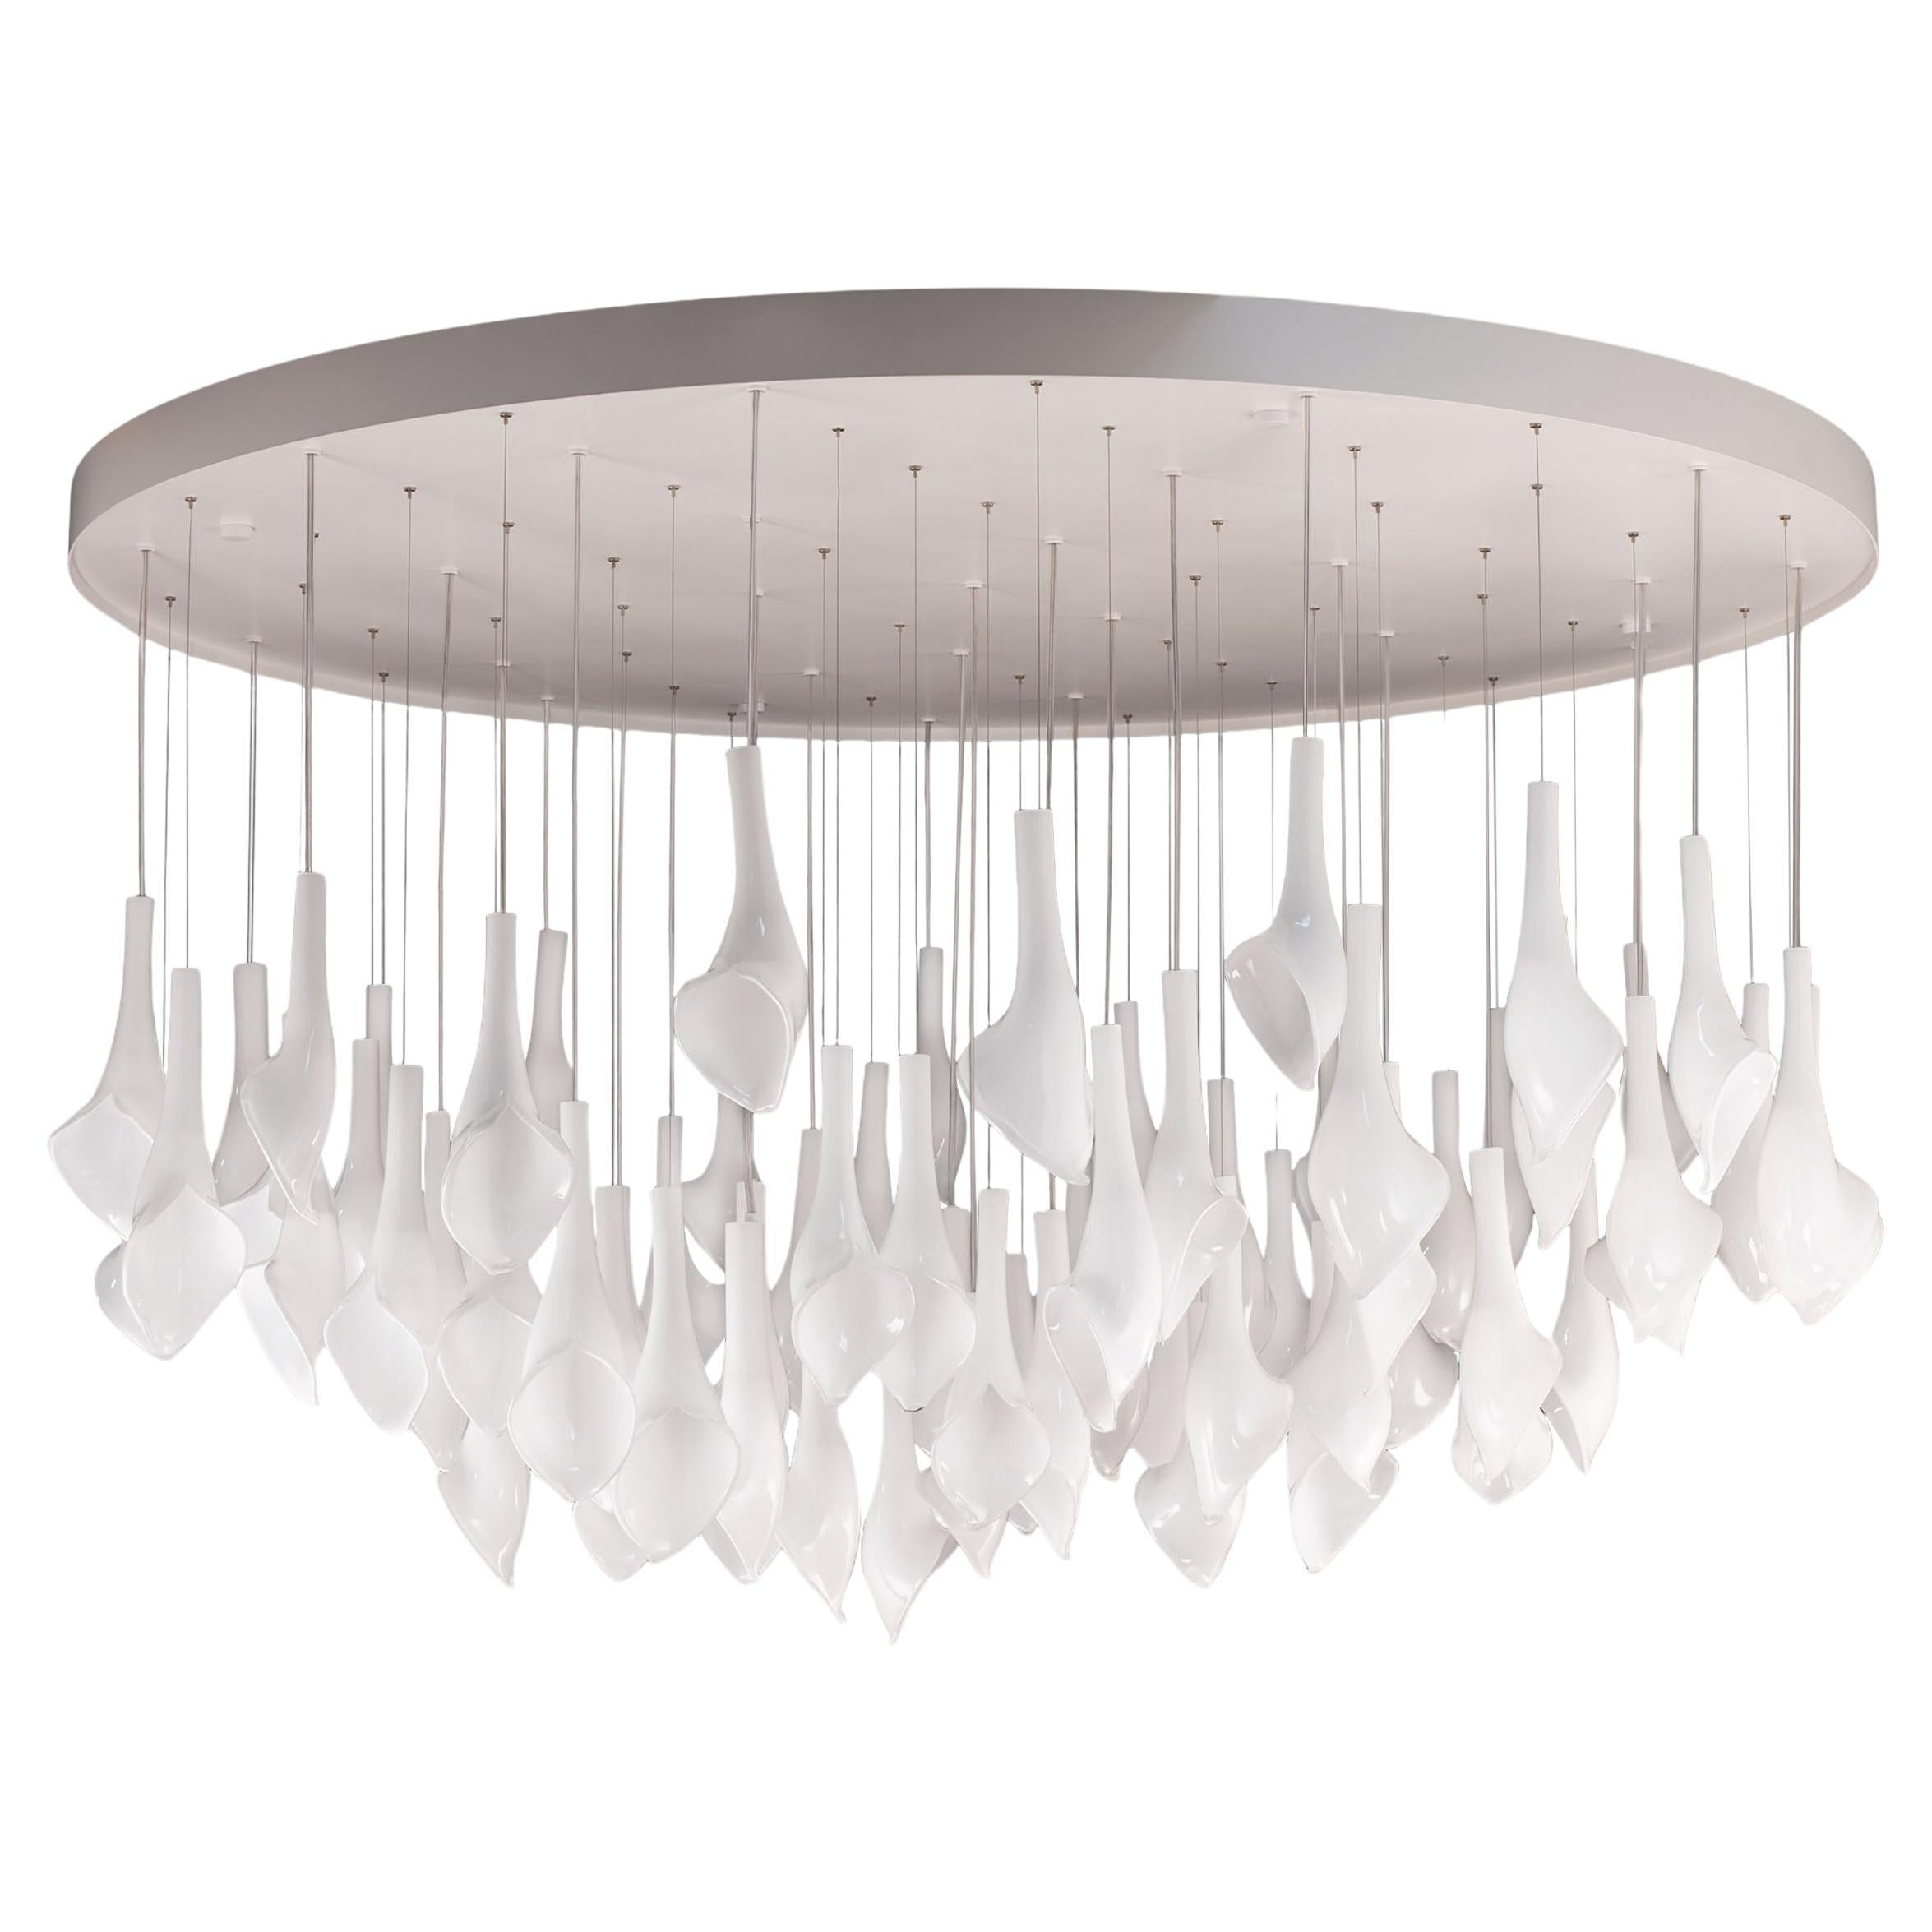 Artistic pendant chandelier 71 lights in White Murano glass drops by Multiforme For Sale